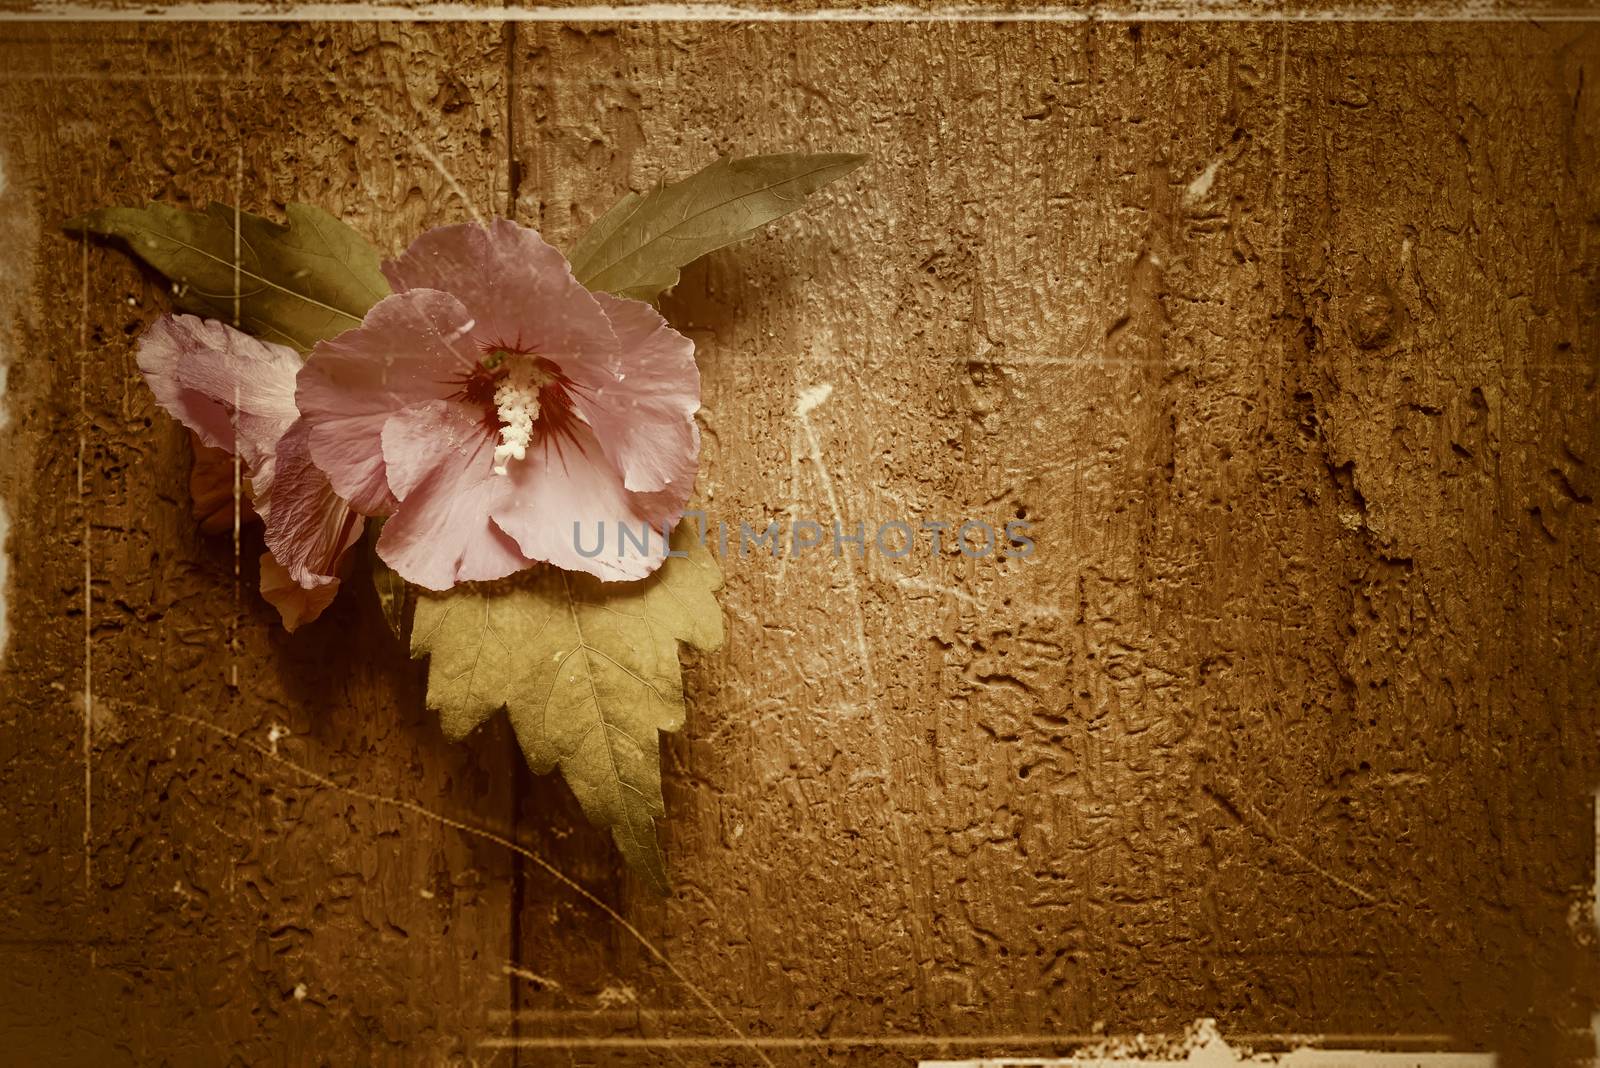  Flower on old wooden background by Carche